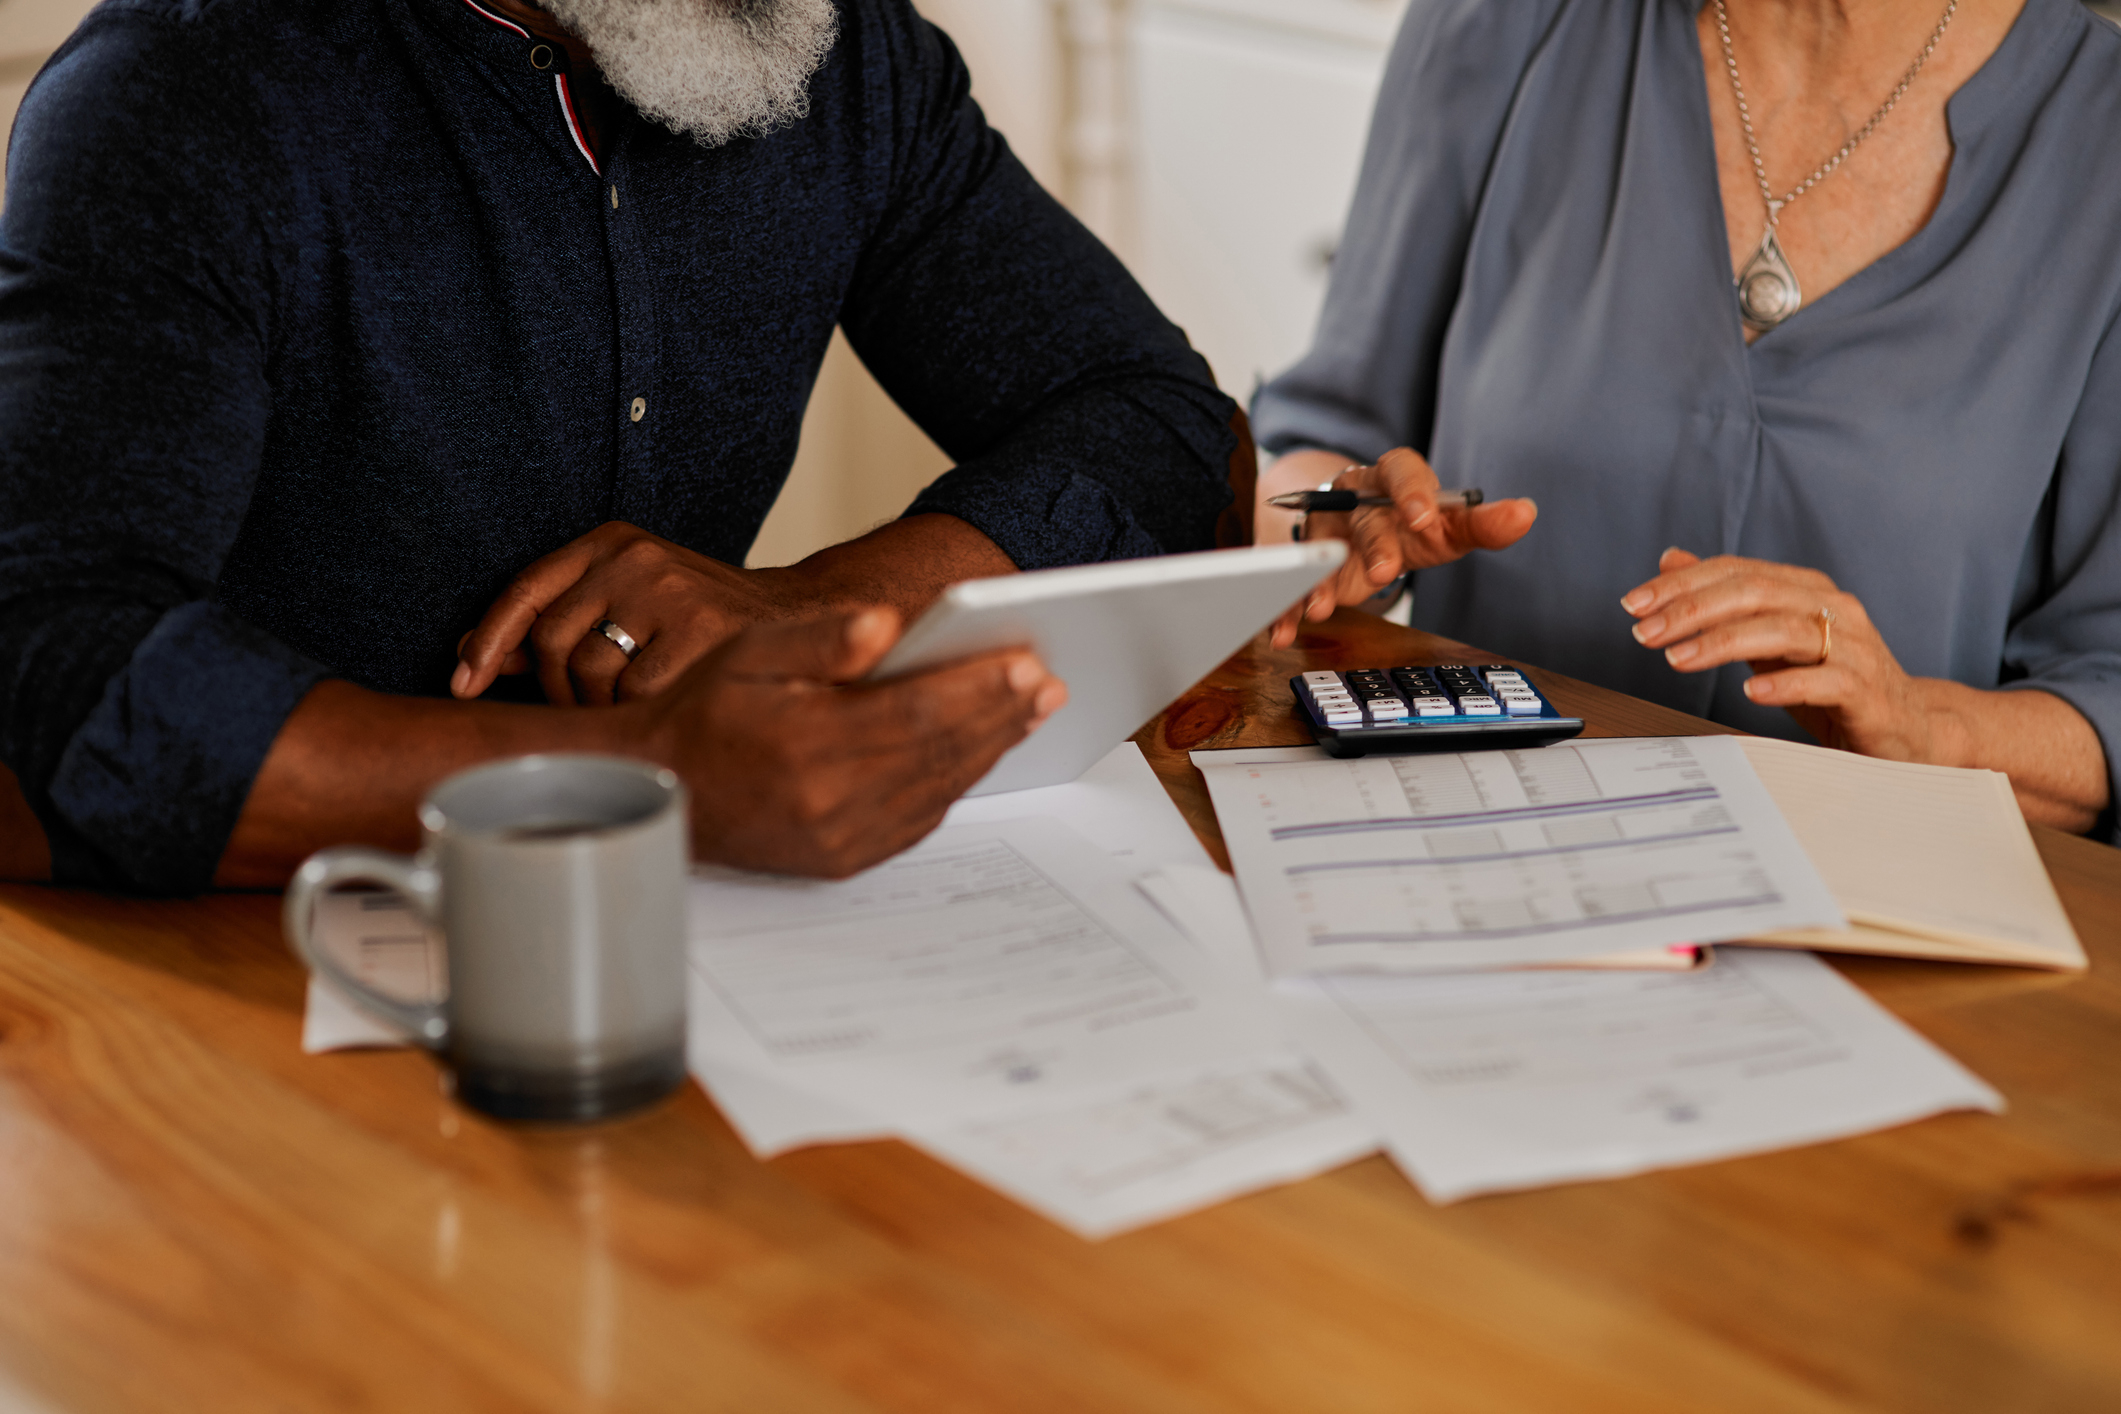 Two people reviewing finances with calculator and documents on a table